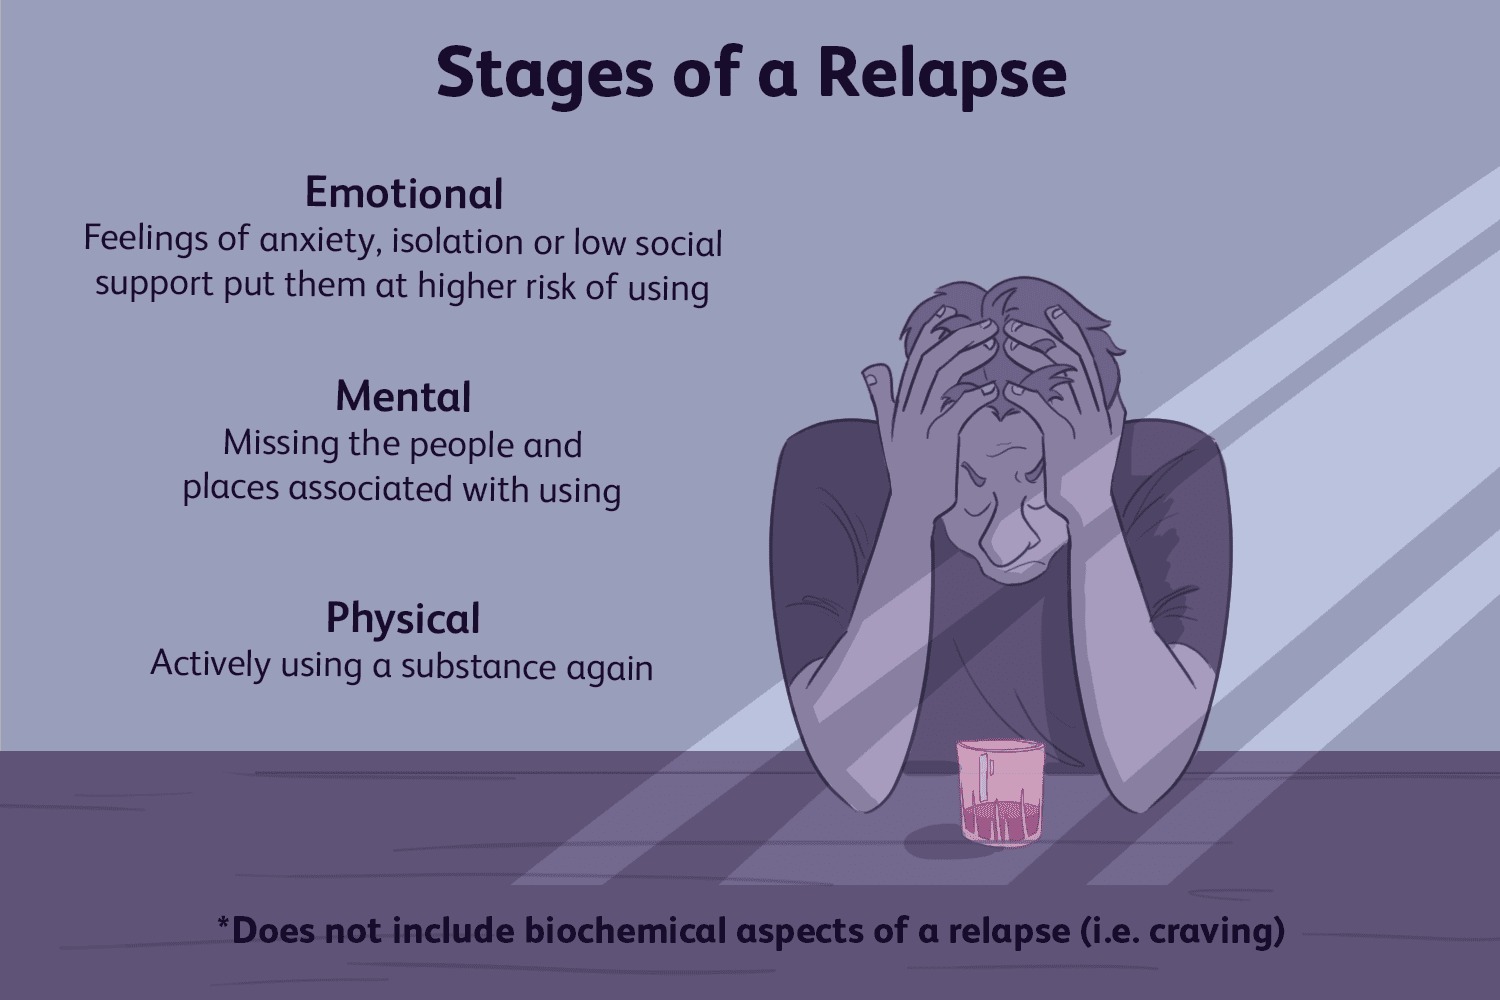 Back on Track: What to Expect During Rehab After a Drug Relapse